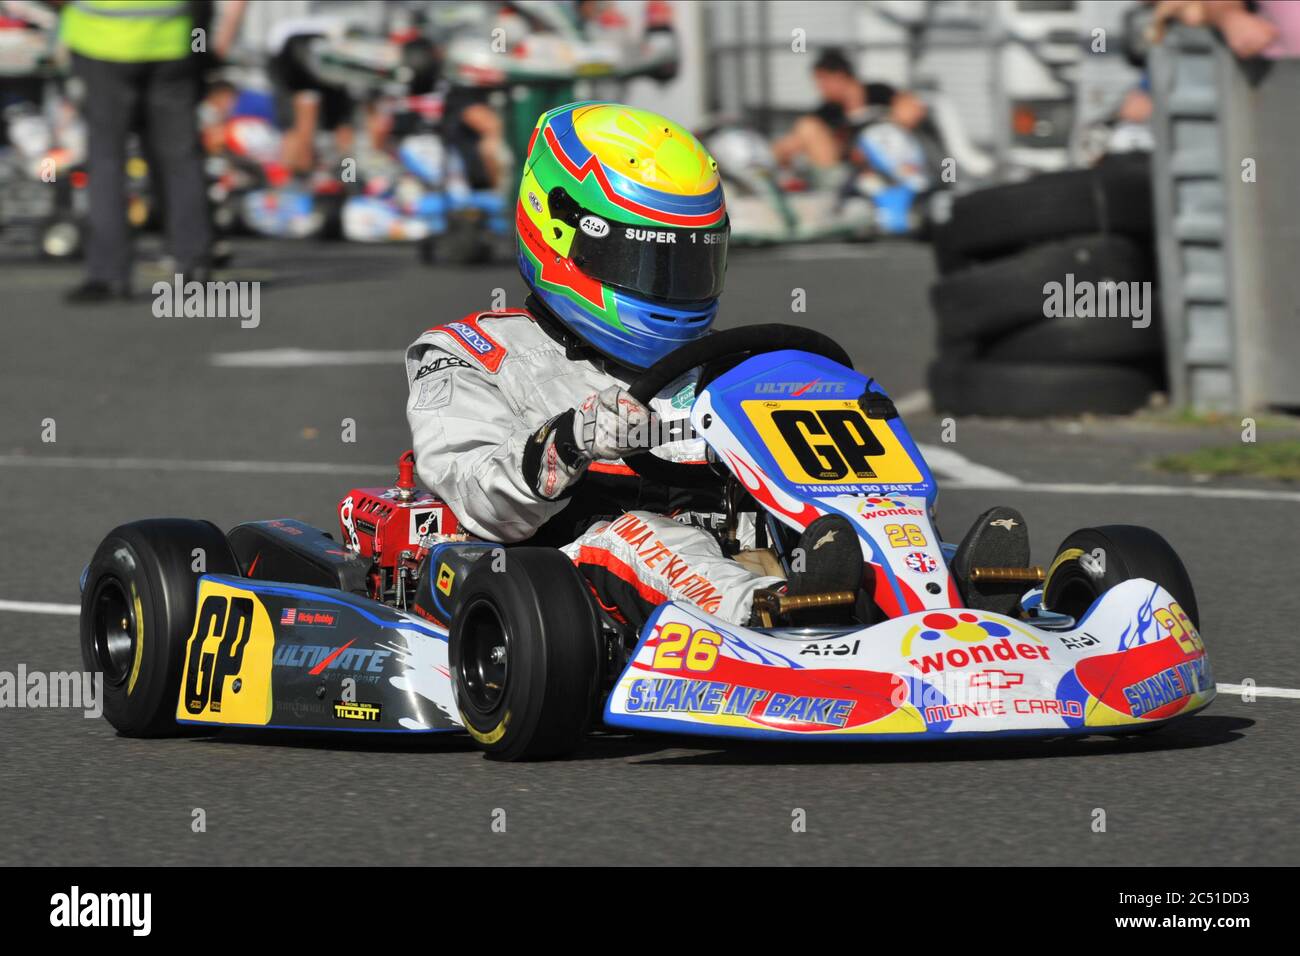 F1 driver George Russell in his early Karting career. Stock Photo